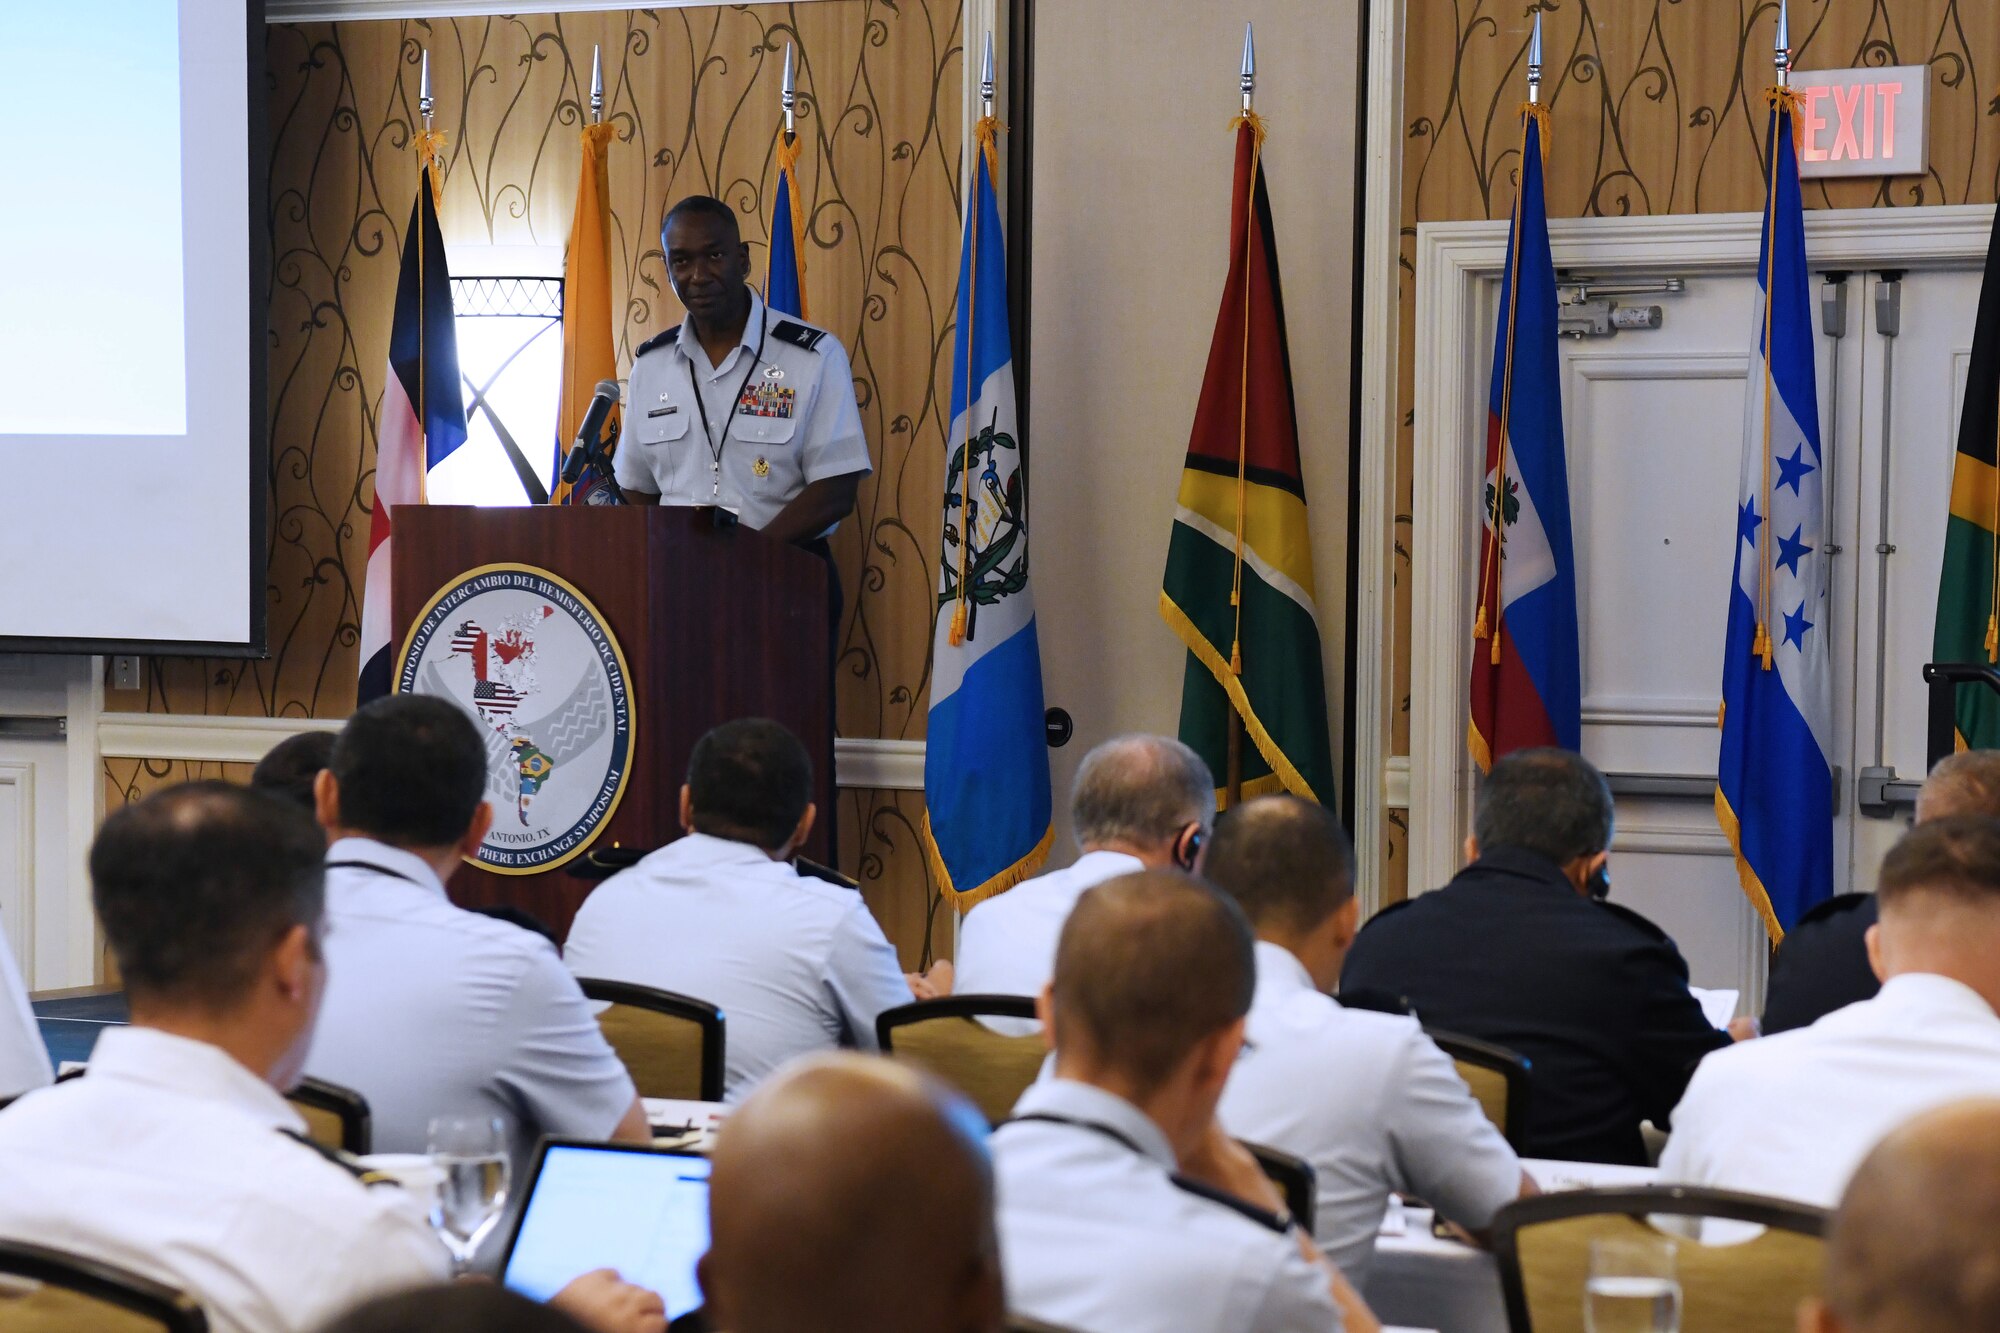 Col. Isaac Davidson, Inter-American Air Forces Academy commandant, welcomed foreign mission partners to the 4th annual Western Hemisphere Exchange Symposium May 19 at San Antonio, Texas.